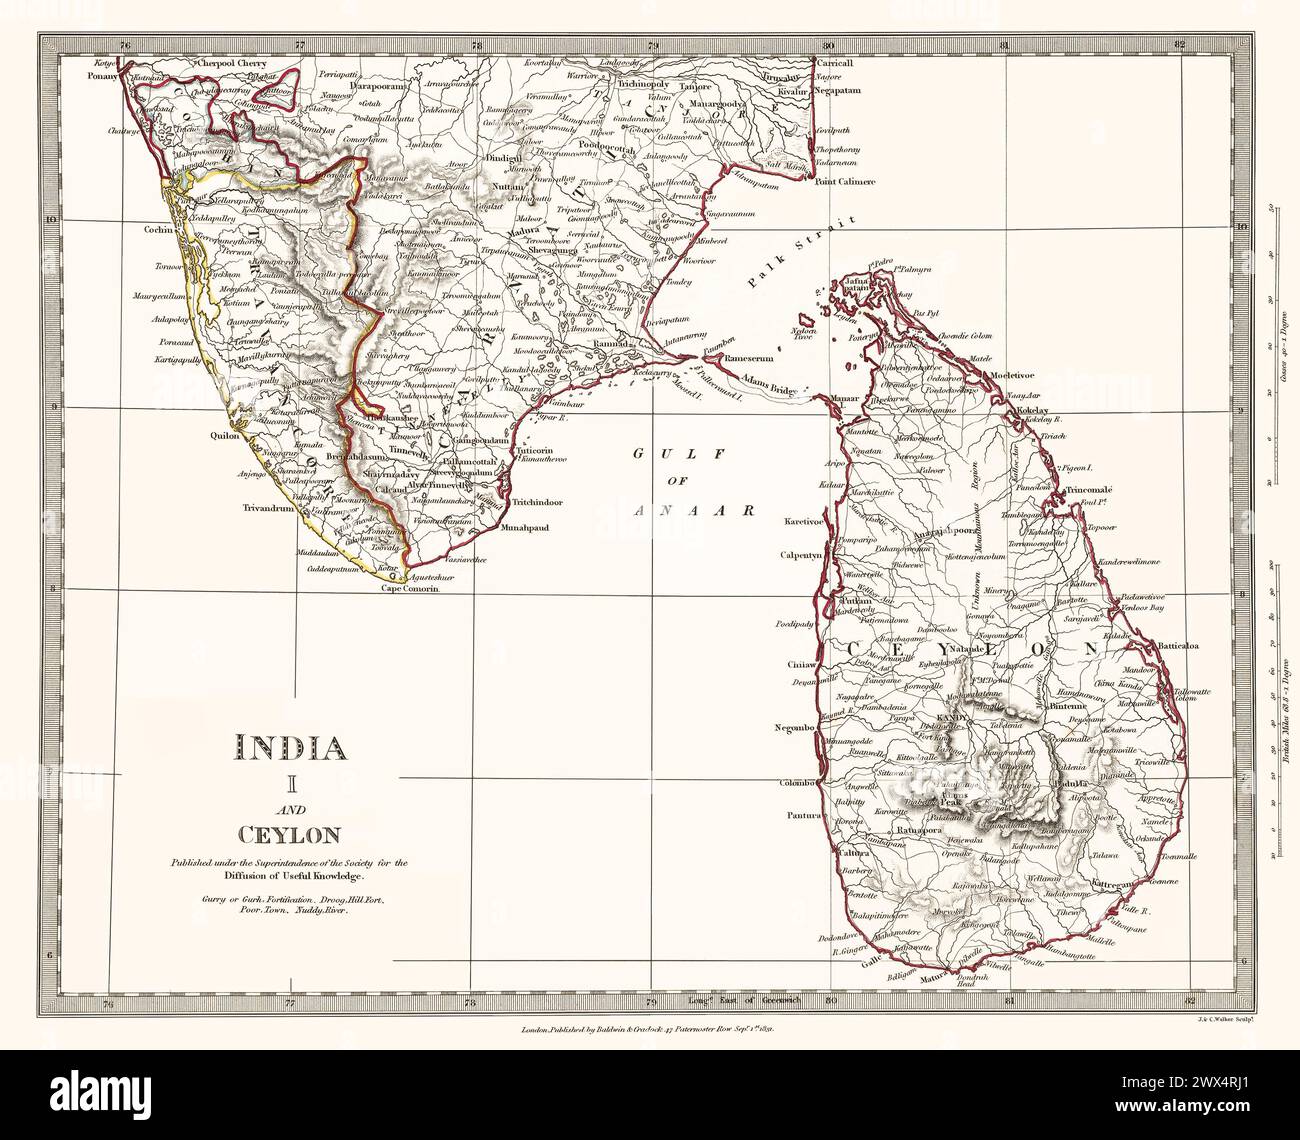 Original Title: India I and Ceylon. This is a restored, enhanced reproduction of an antique, detailed map published 1844. It shows southern India and Sri Lanka, historically known as Ceylon. This was one of a series of maps published by the Society for the Diffusion of Useful Knowledge, a British organization. Stock Photo